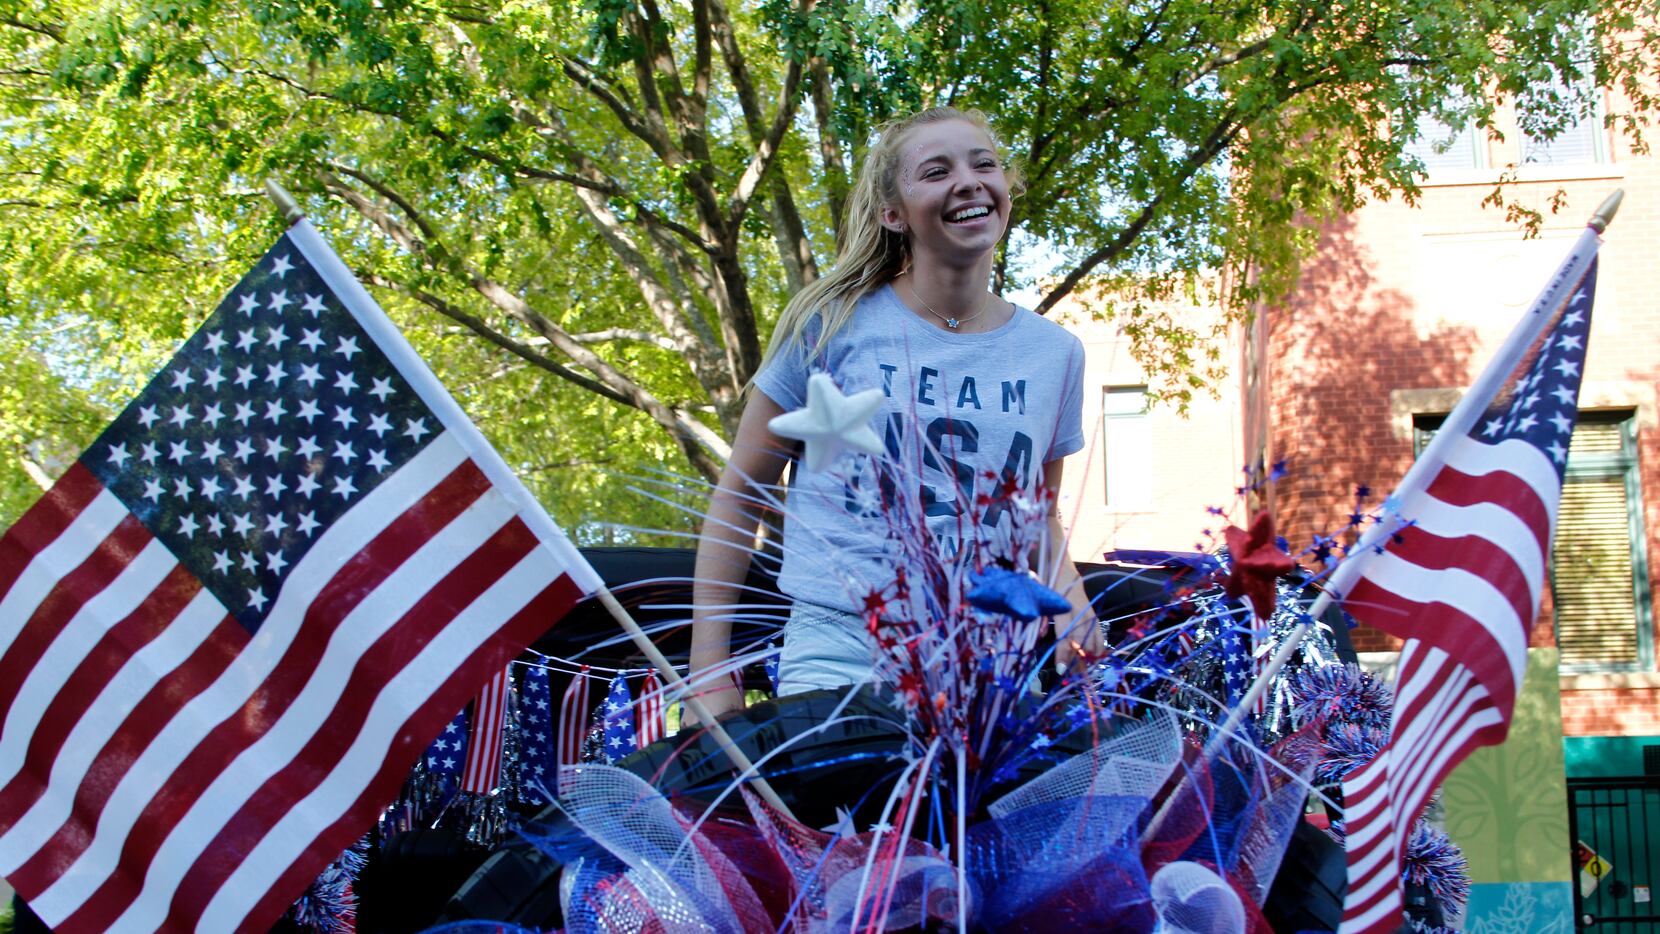 Hailey Hernandez revels in the moment as a parade planned in her honor began around the...